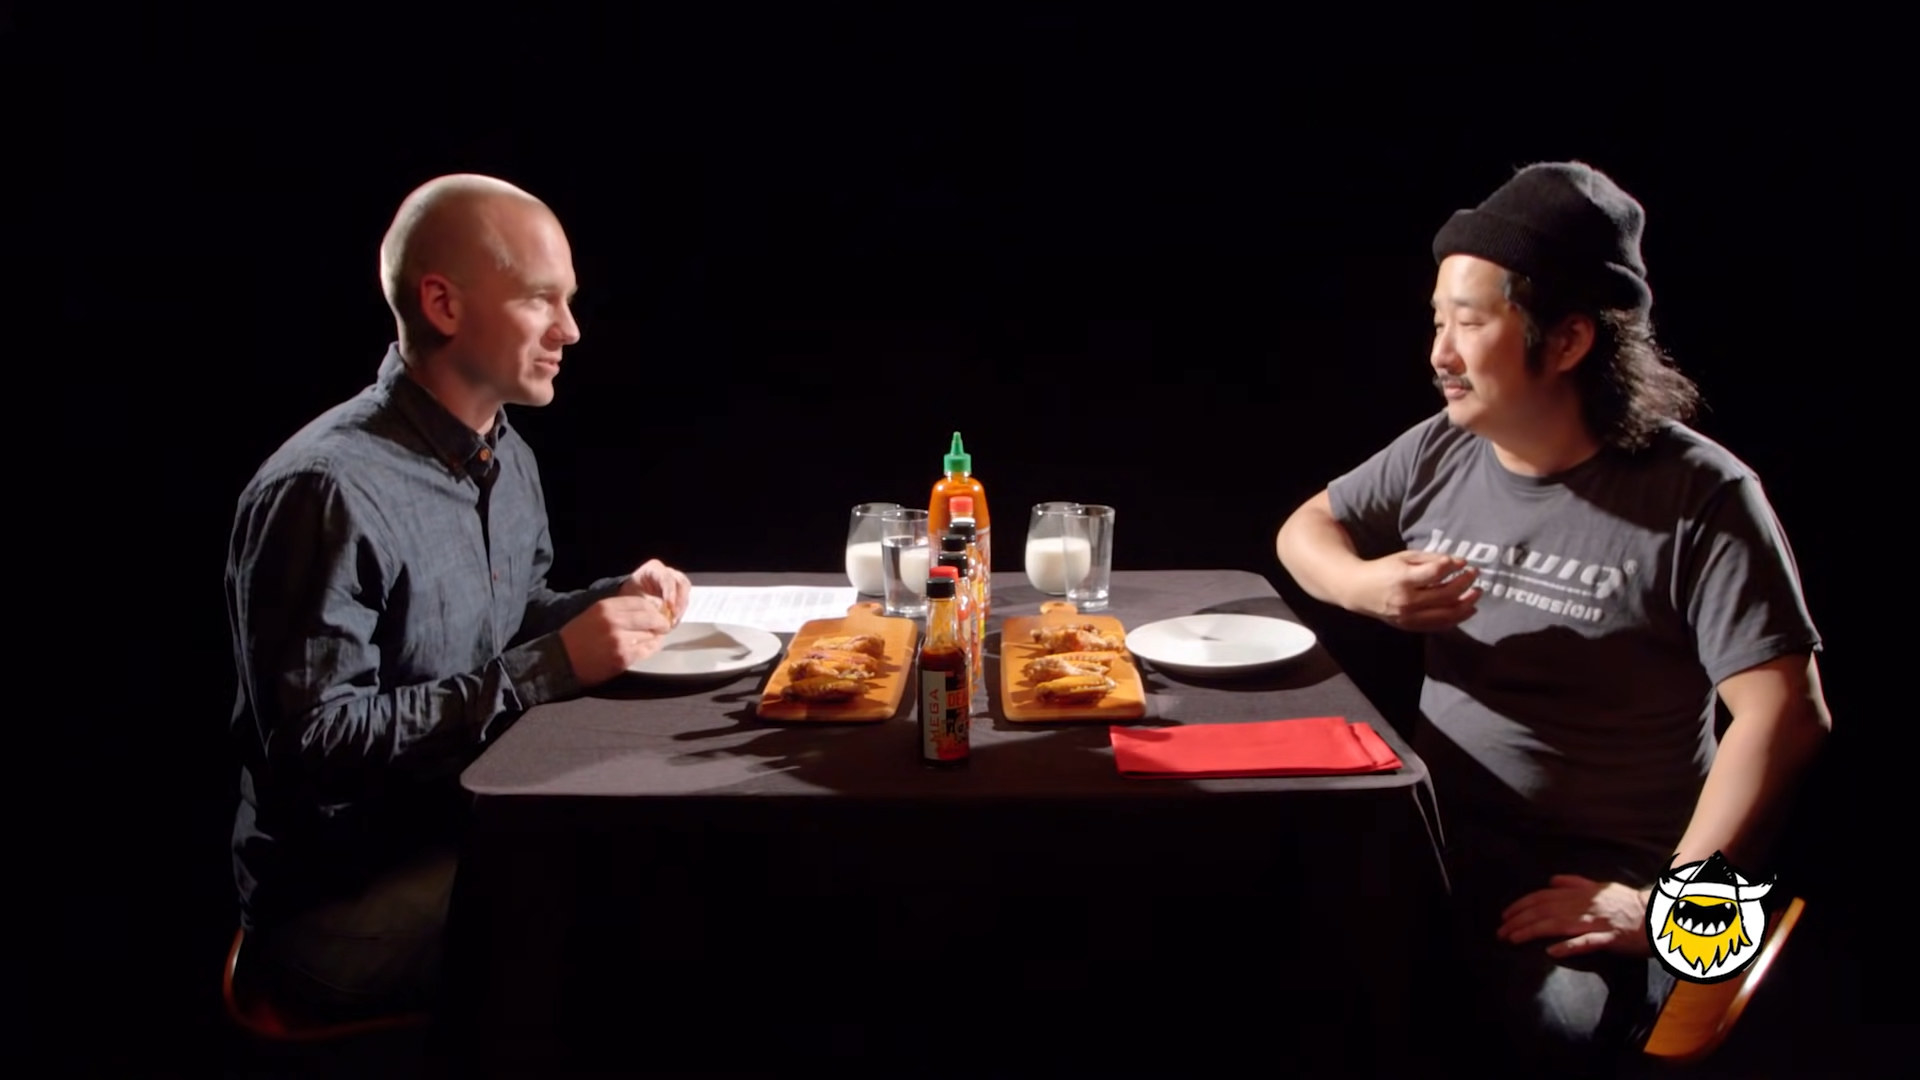 Sean Evans and Bobby Lee sitting across from each other in an episode of Hot Ones